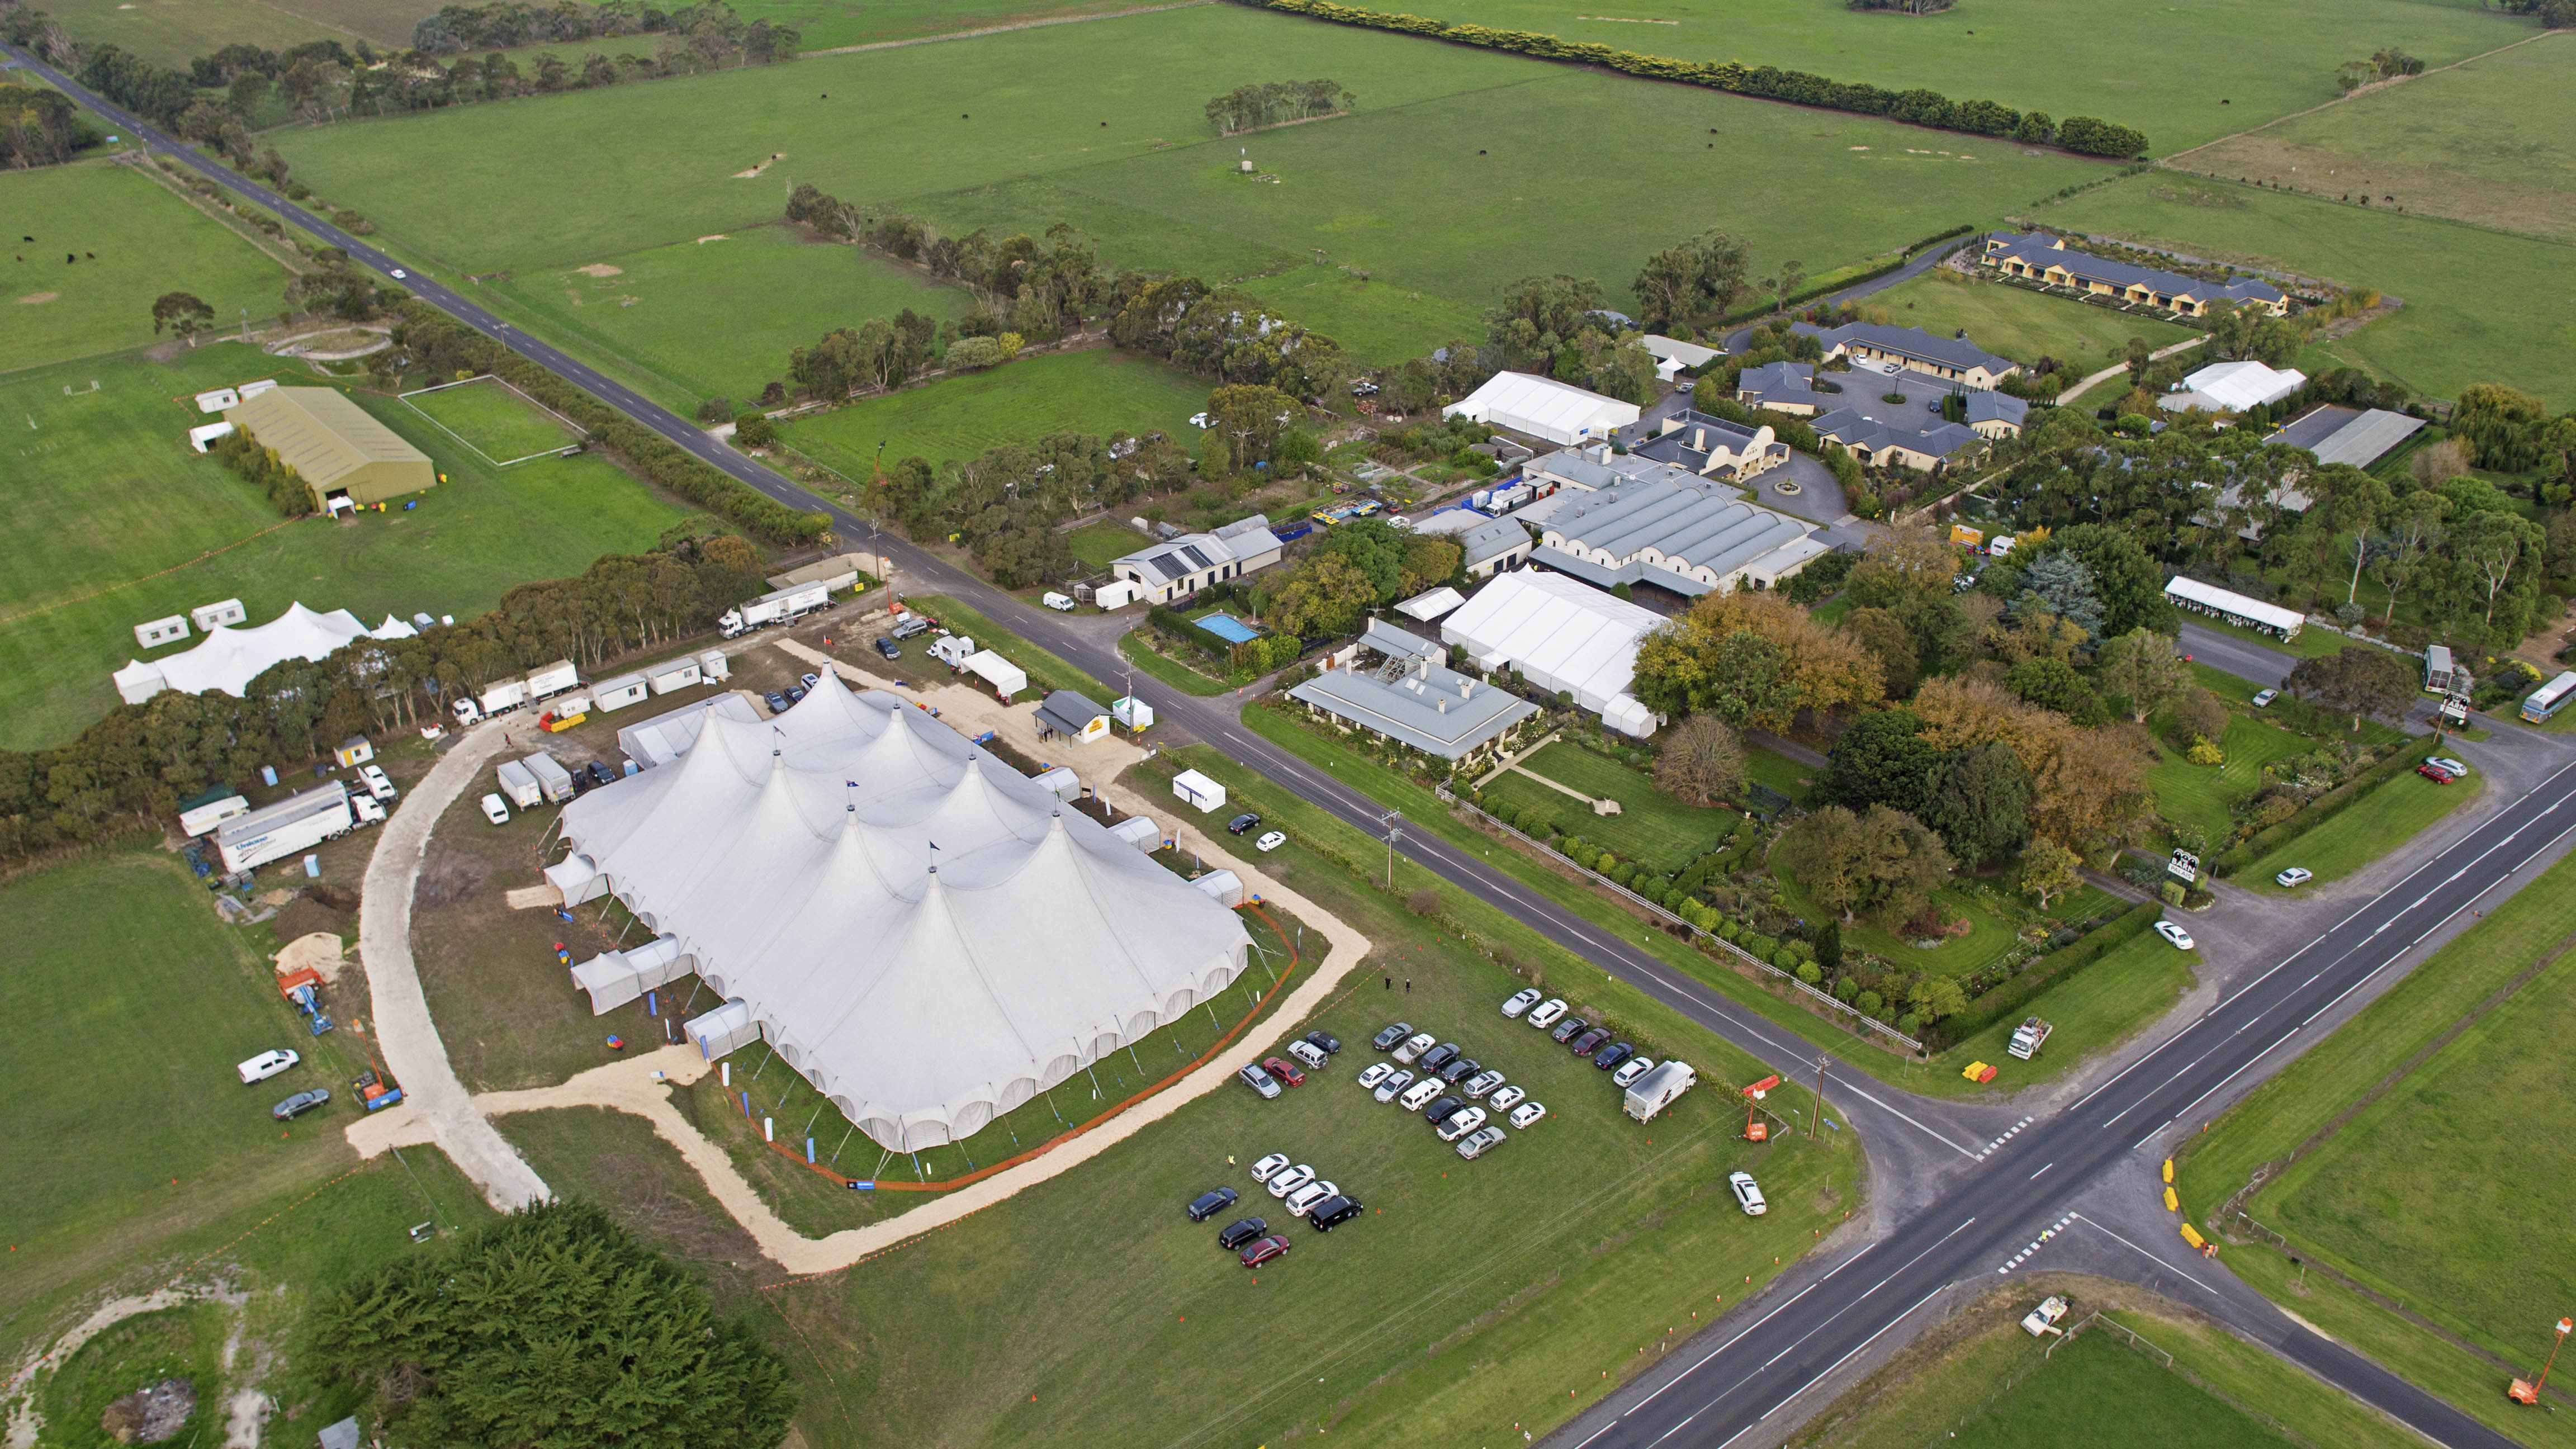 The big top-style James Morrison Pavilion is the largest tent to have been erected in Australia for a seated audience, with more than 6100 chairs!